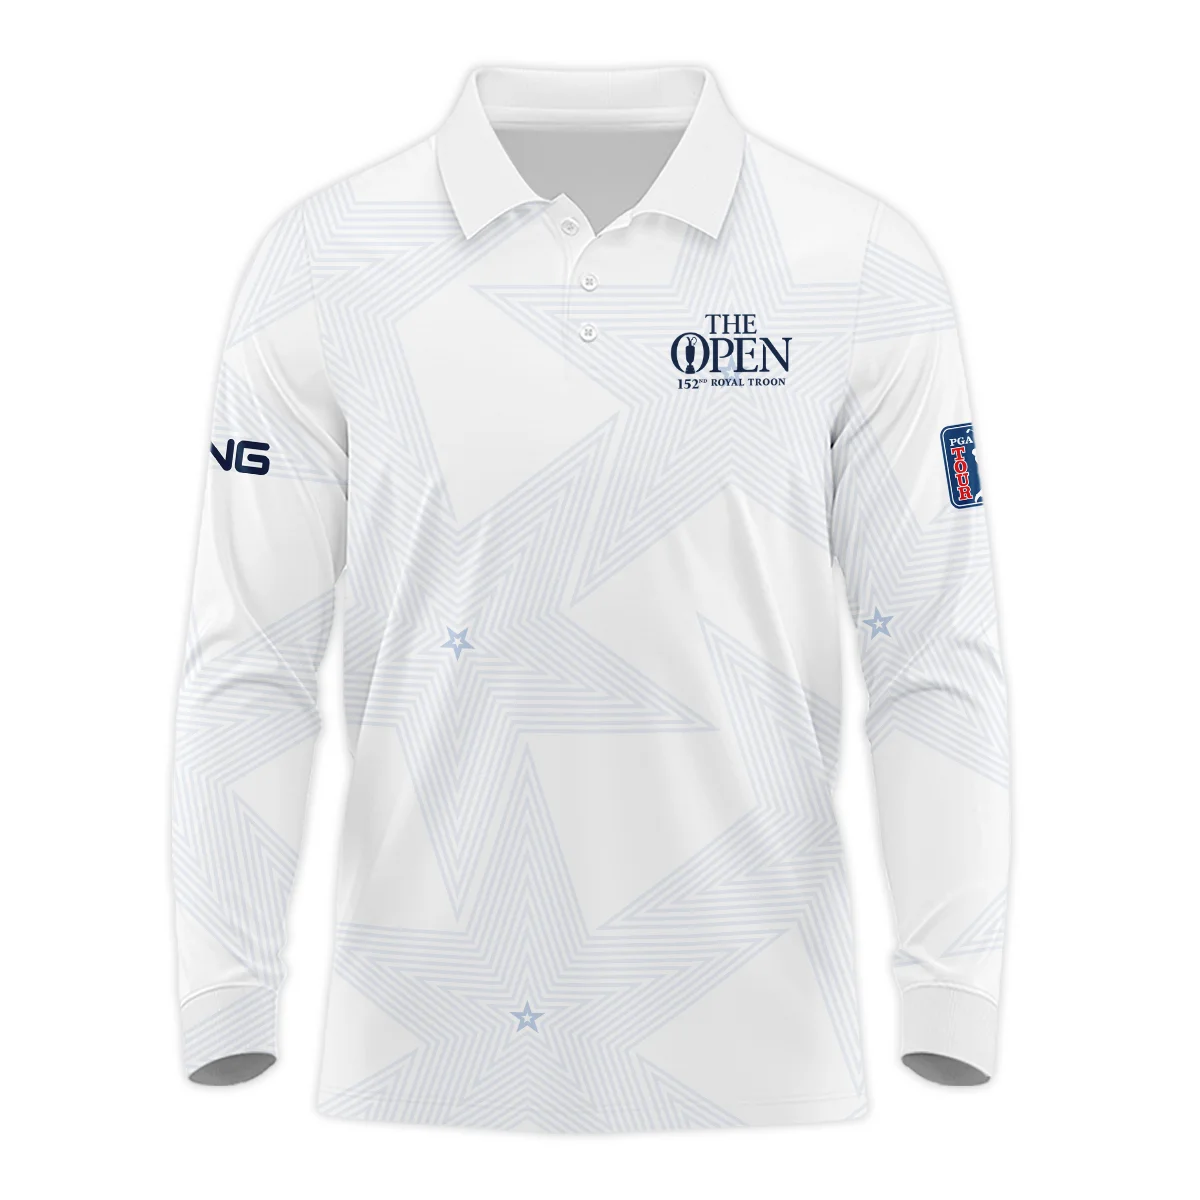 152nd The Open Championship Golf Ping Long Polo Shirt Stars White Navy Golf Sports All Over Print Long Polo Shirt For Men